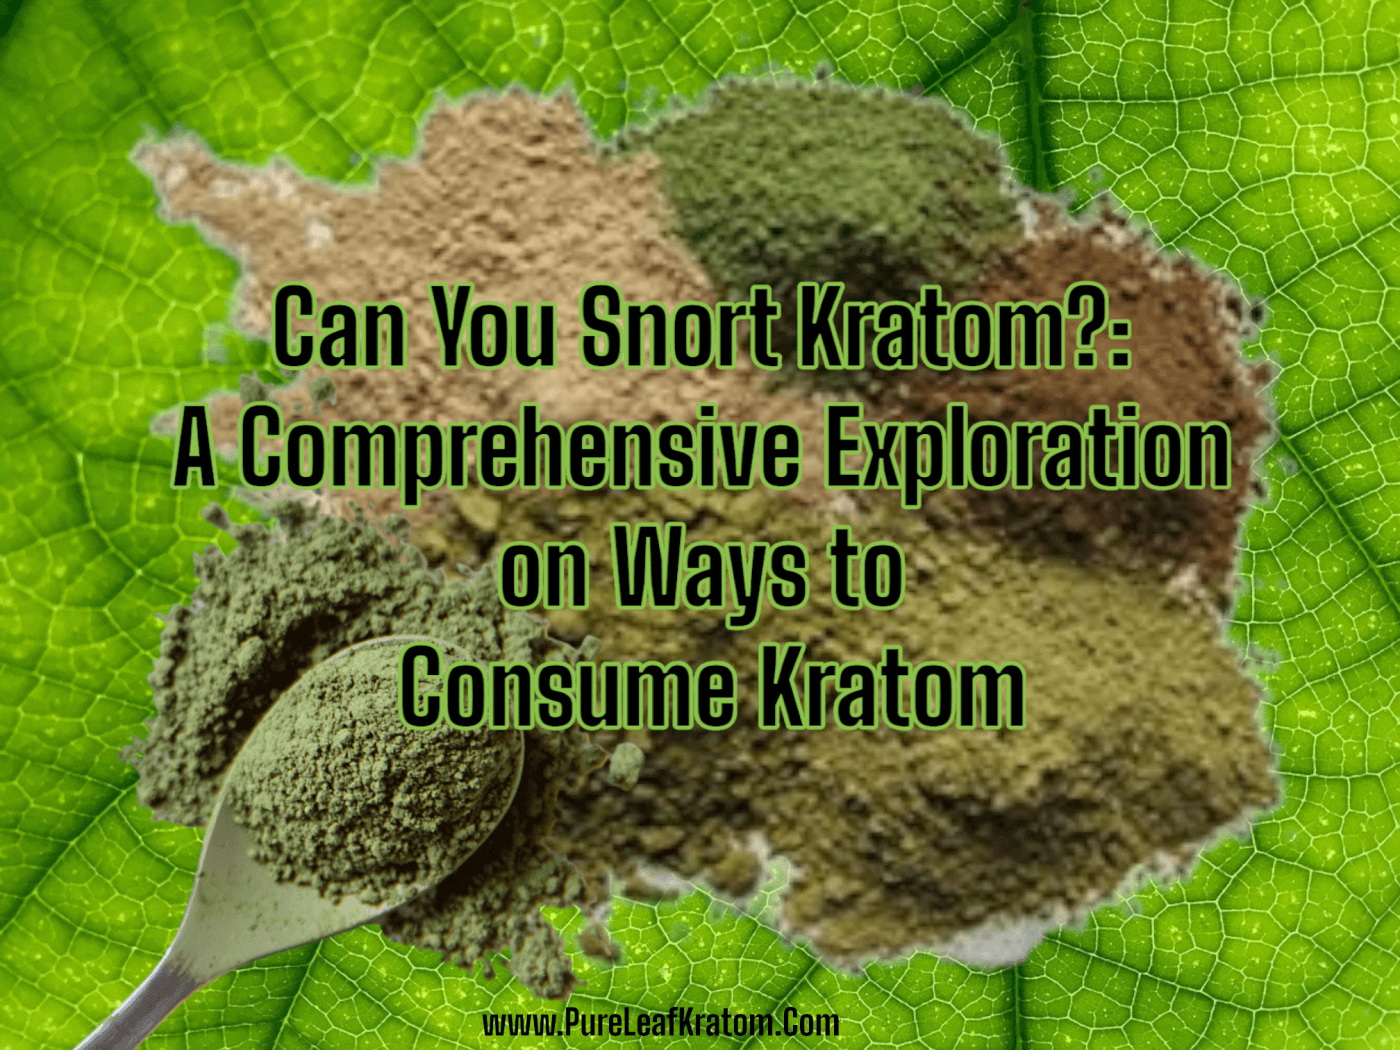 Can You Snort Kratom?: A Comprehensive Exploration on Ways to Consume Kratom